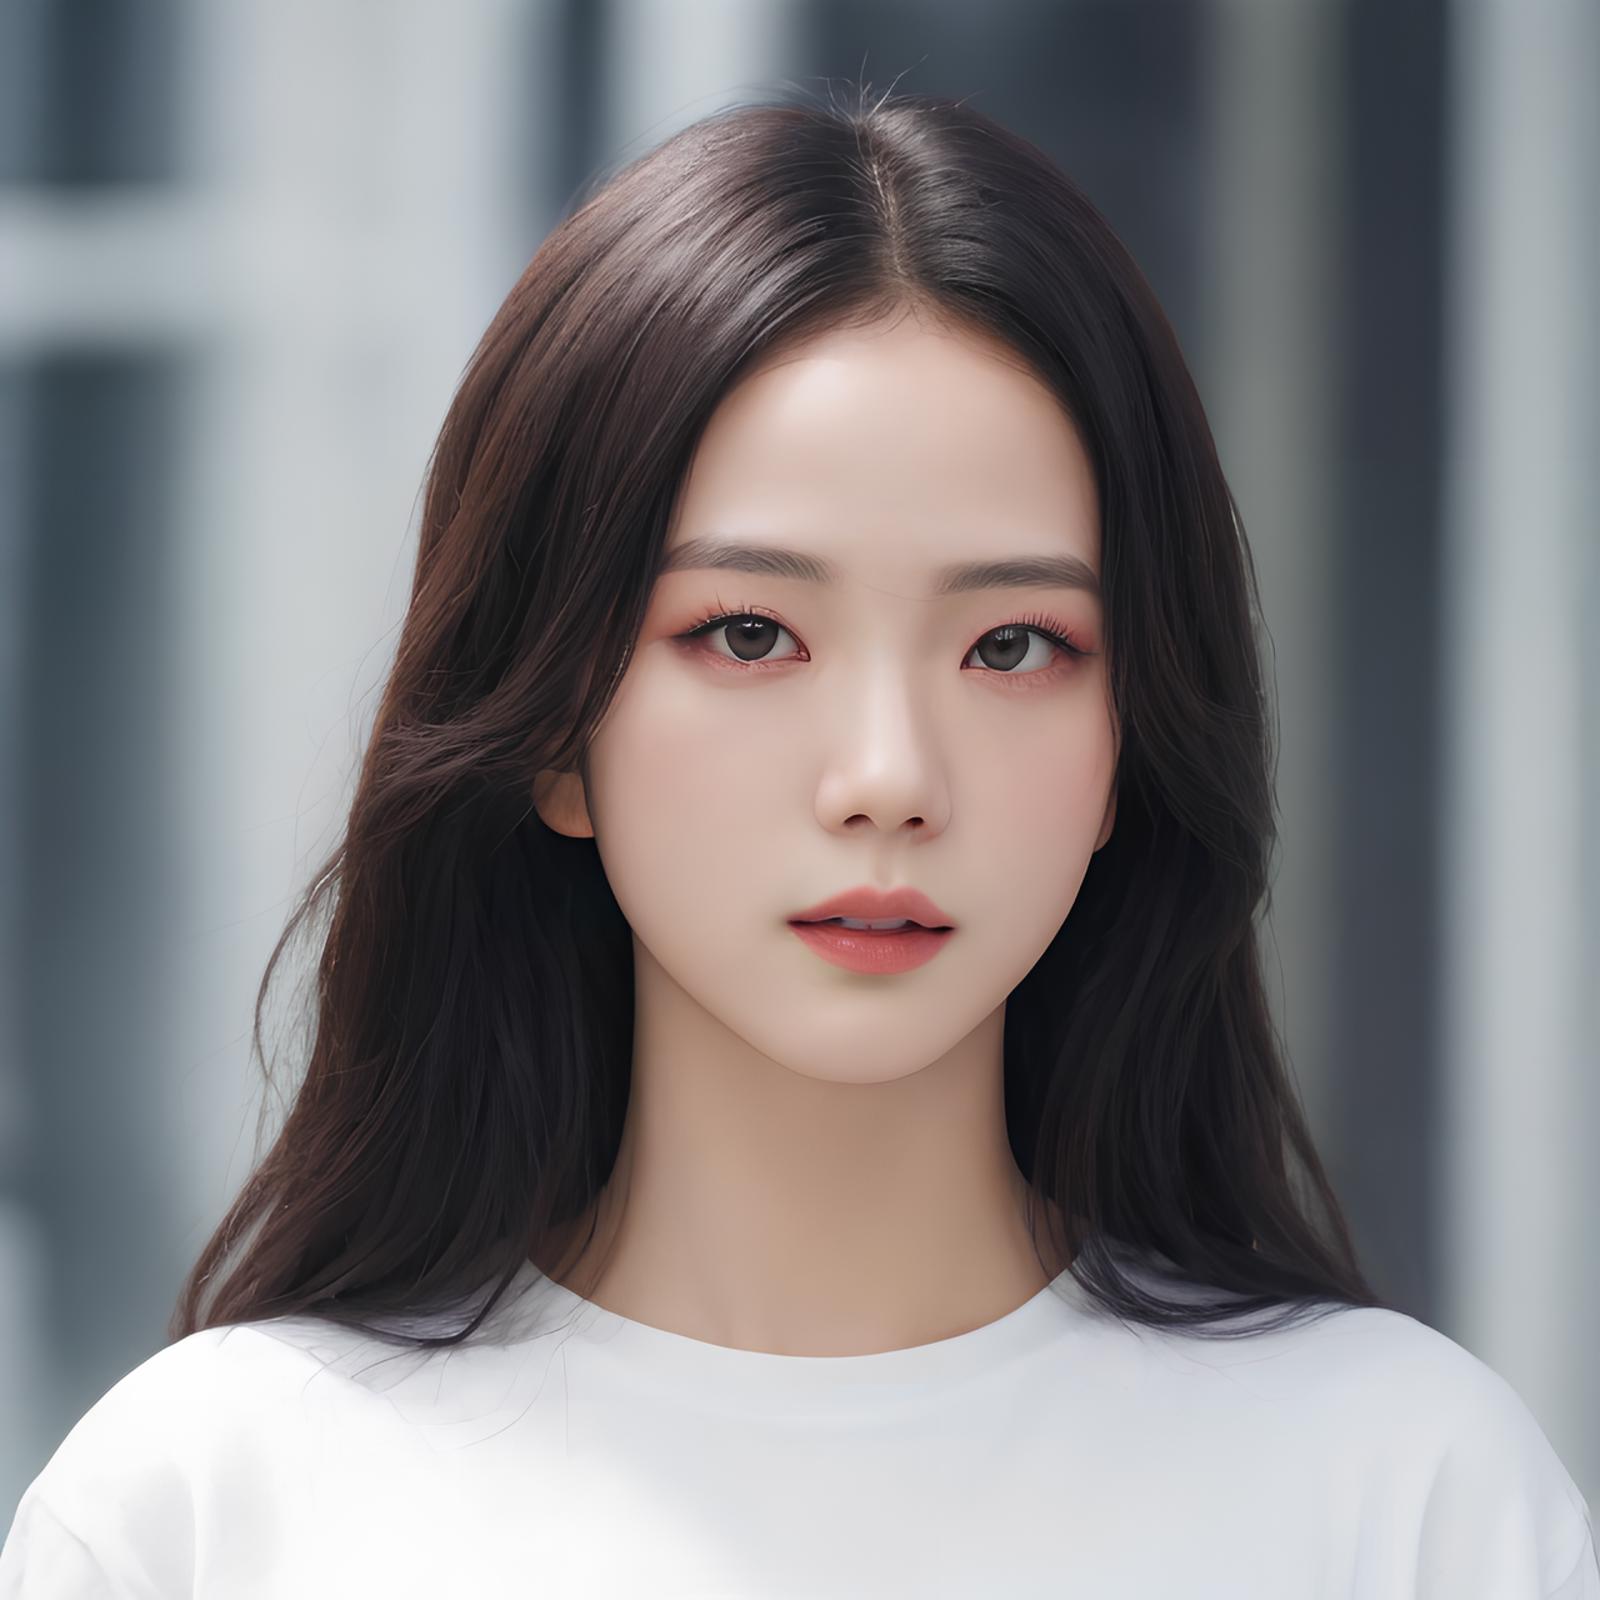 Not Blackpink - Jisoo image by Tissue_AI